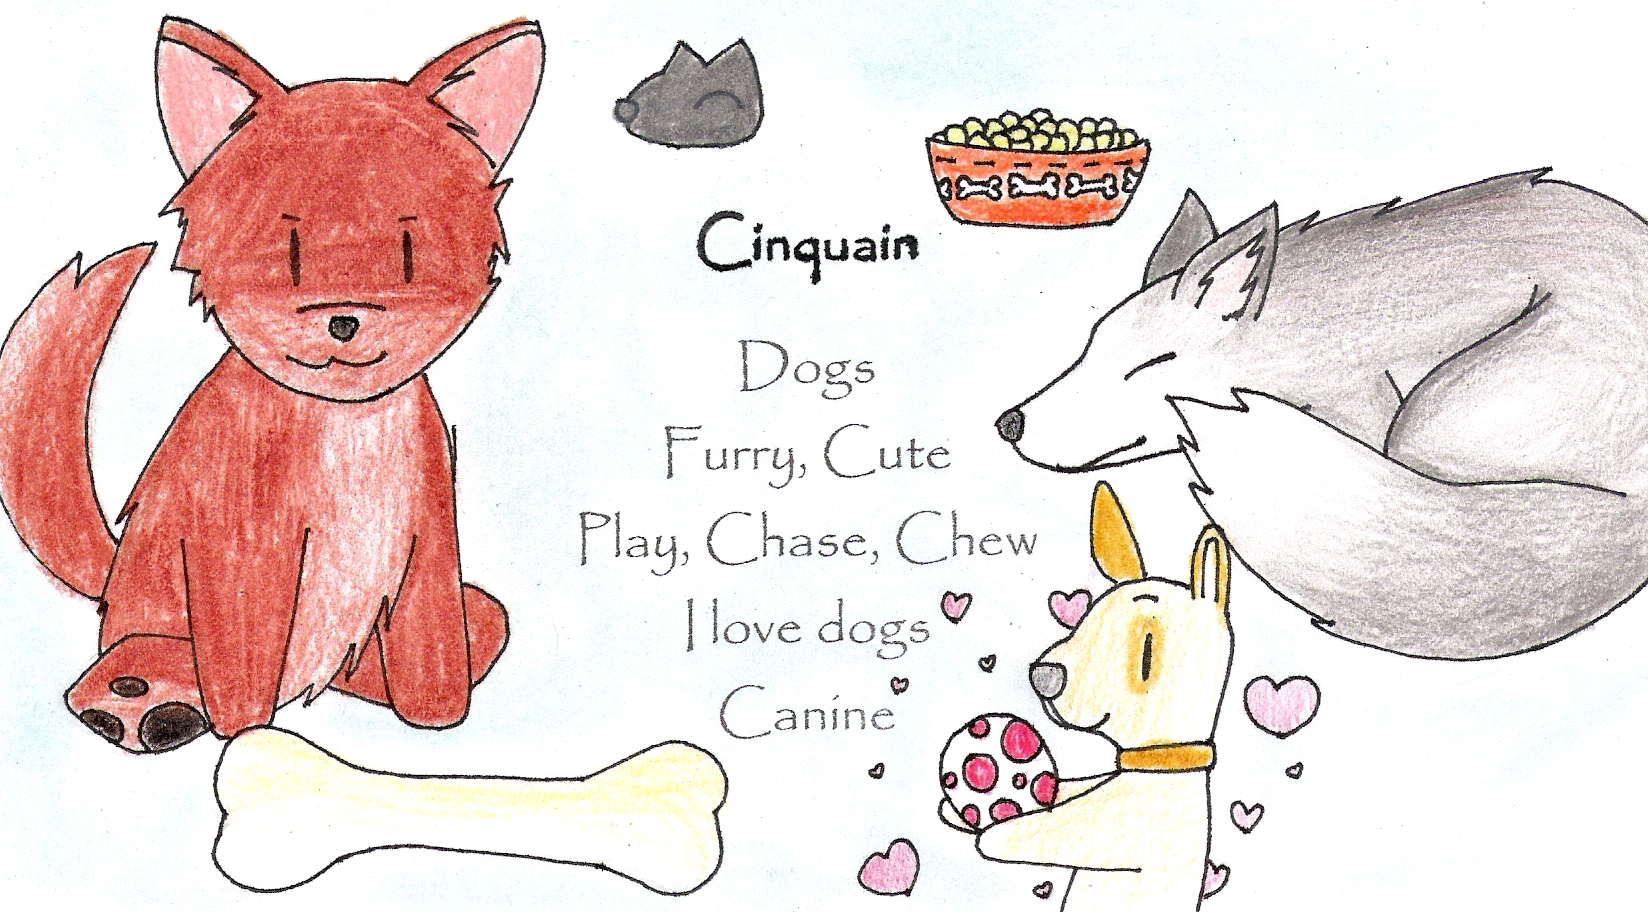 Doggy Cinquian...COLORED lolz XD by Darksideofme